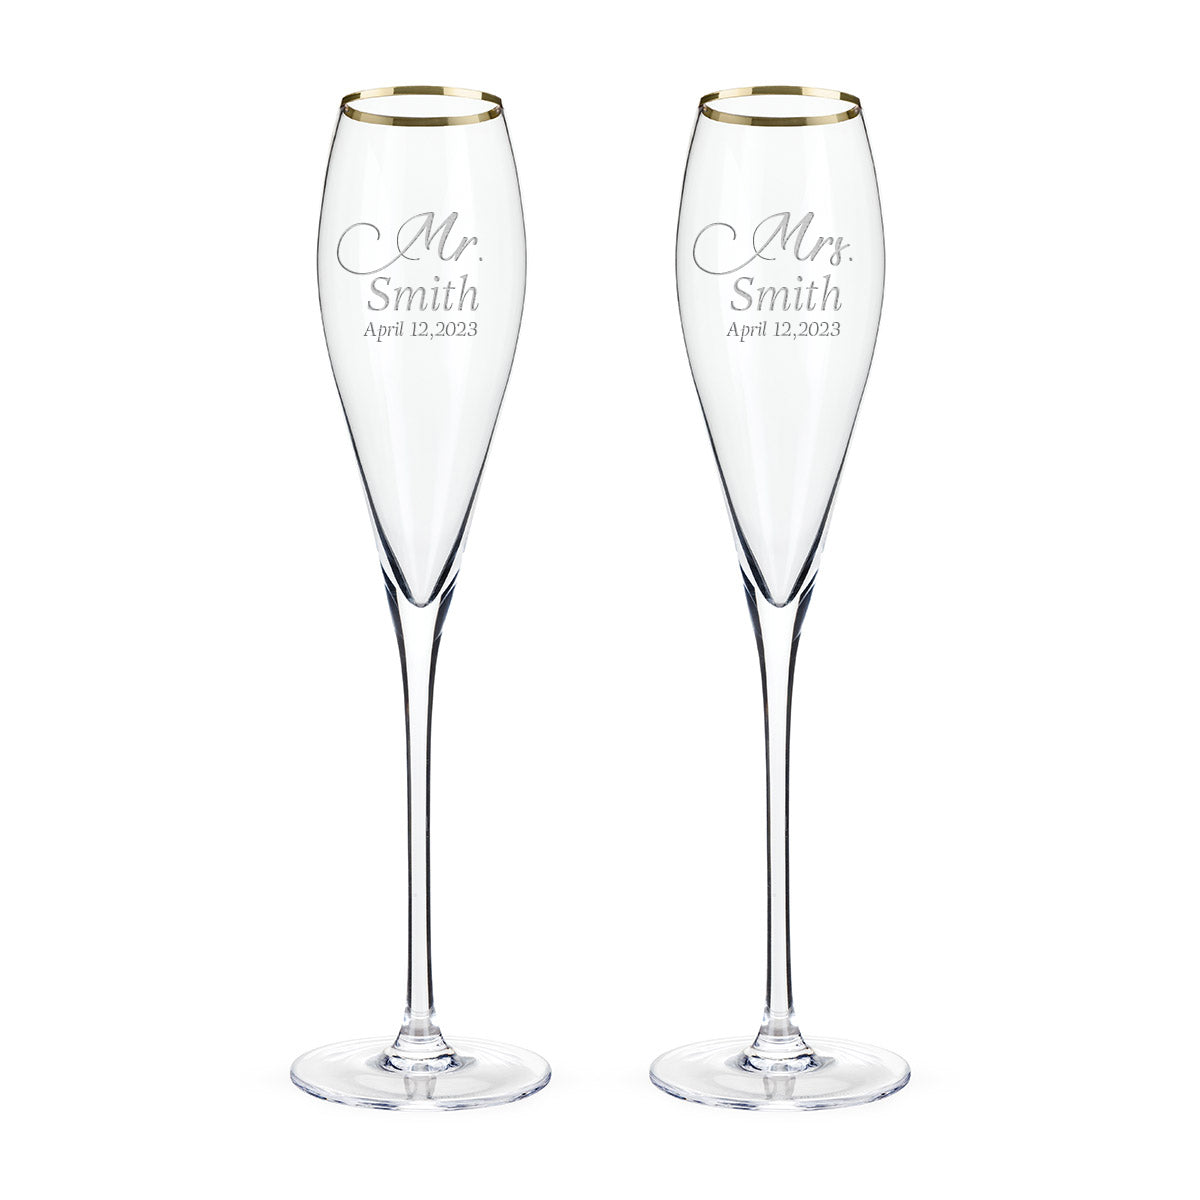 Customizable Mr. & Mrs. Smith, Premium Gold Rimmed Champagne Flute, (Set of 2) Handmade, Handblown, Hand Etched Gifts, Sand Carved, 6oz